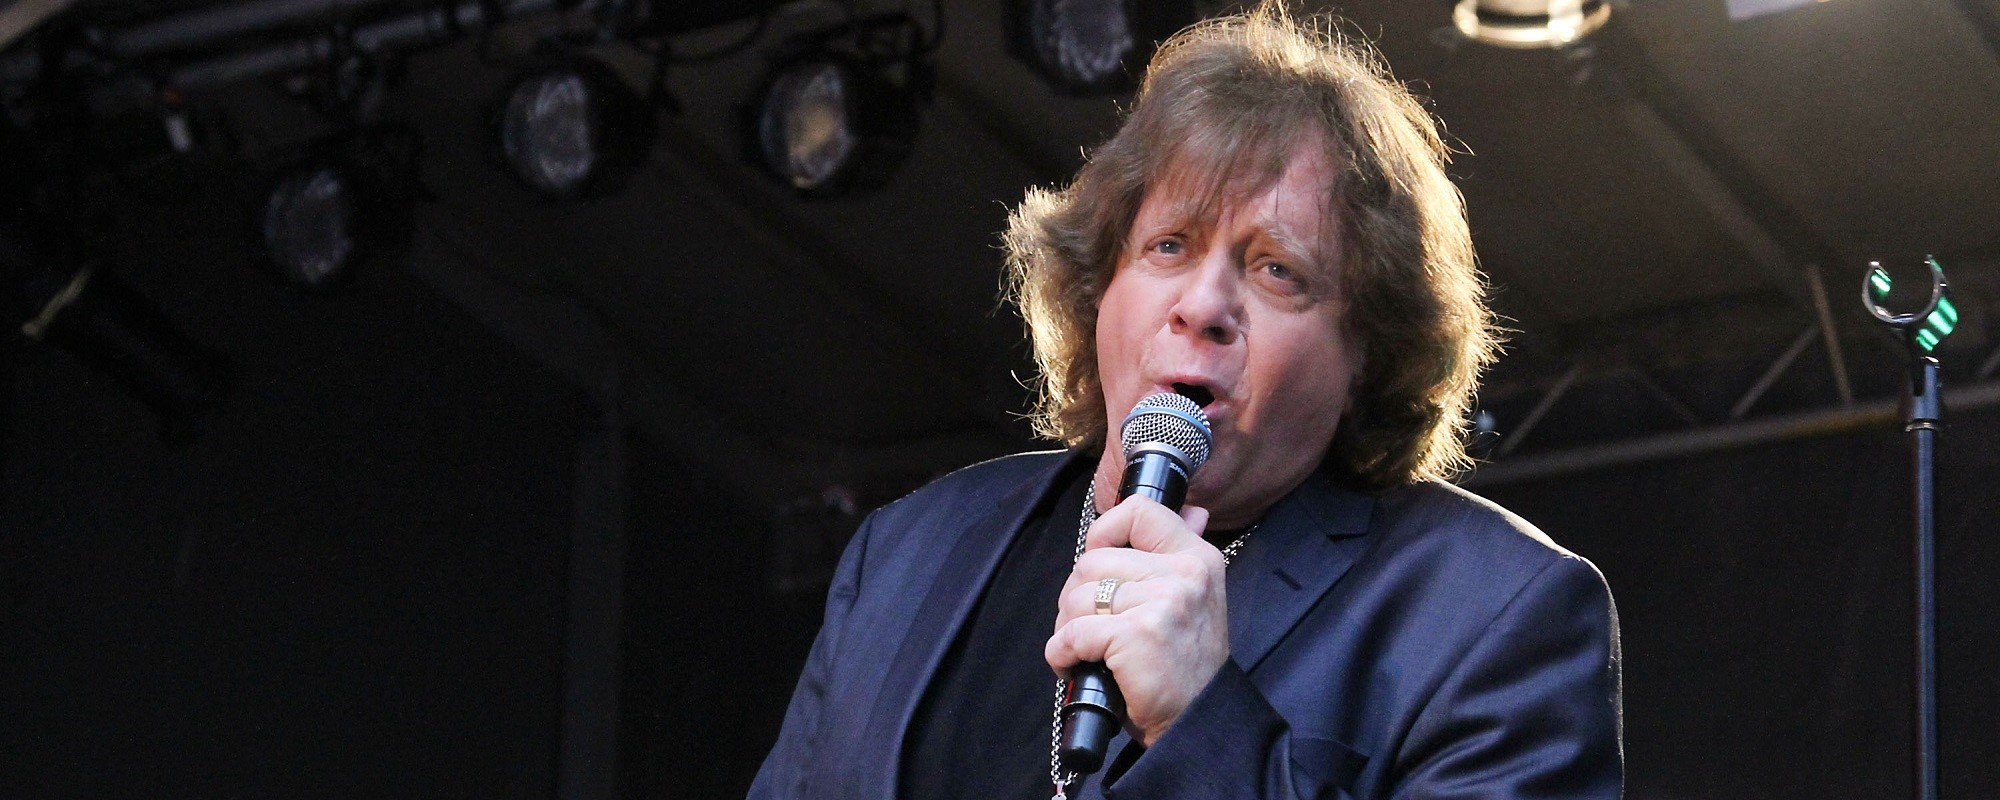 5 Fascinating Fact About Eddie Money in Commemoration of the Late Singer’s 75th Birthday